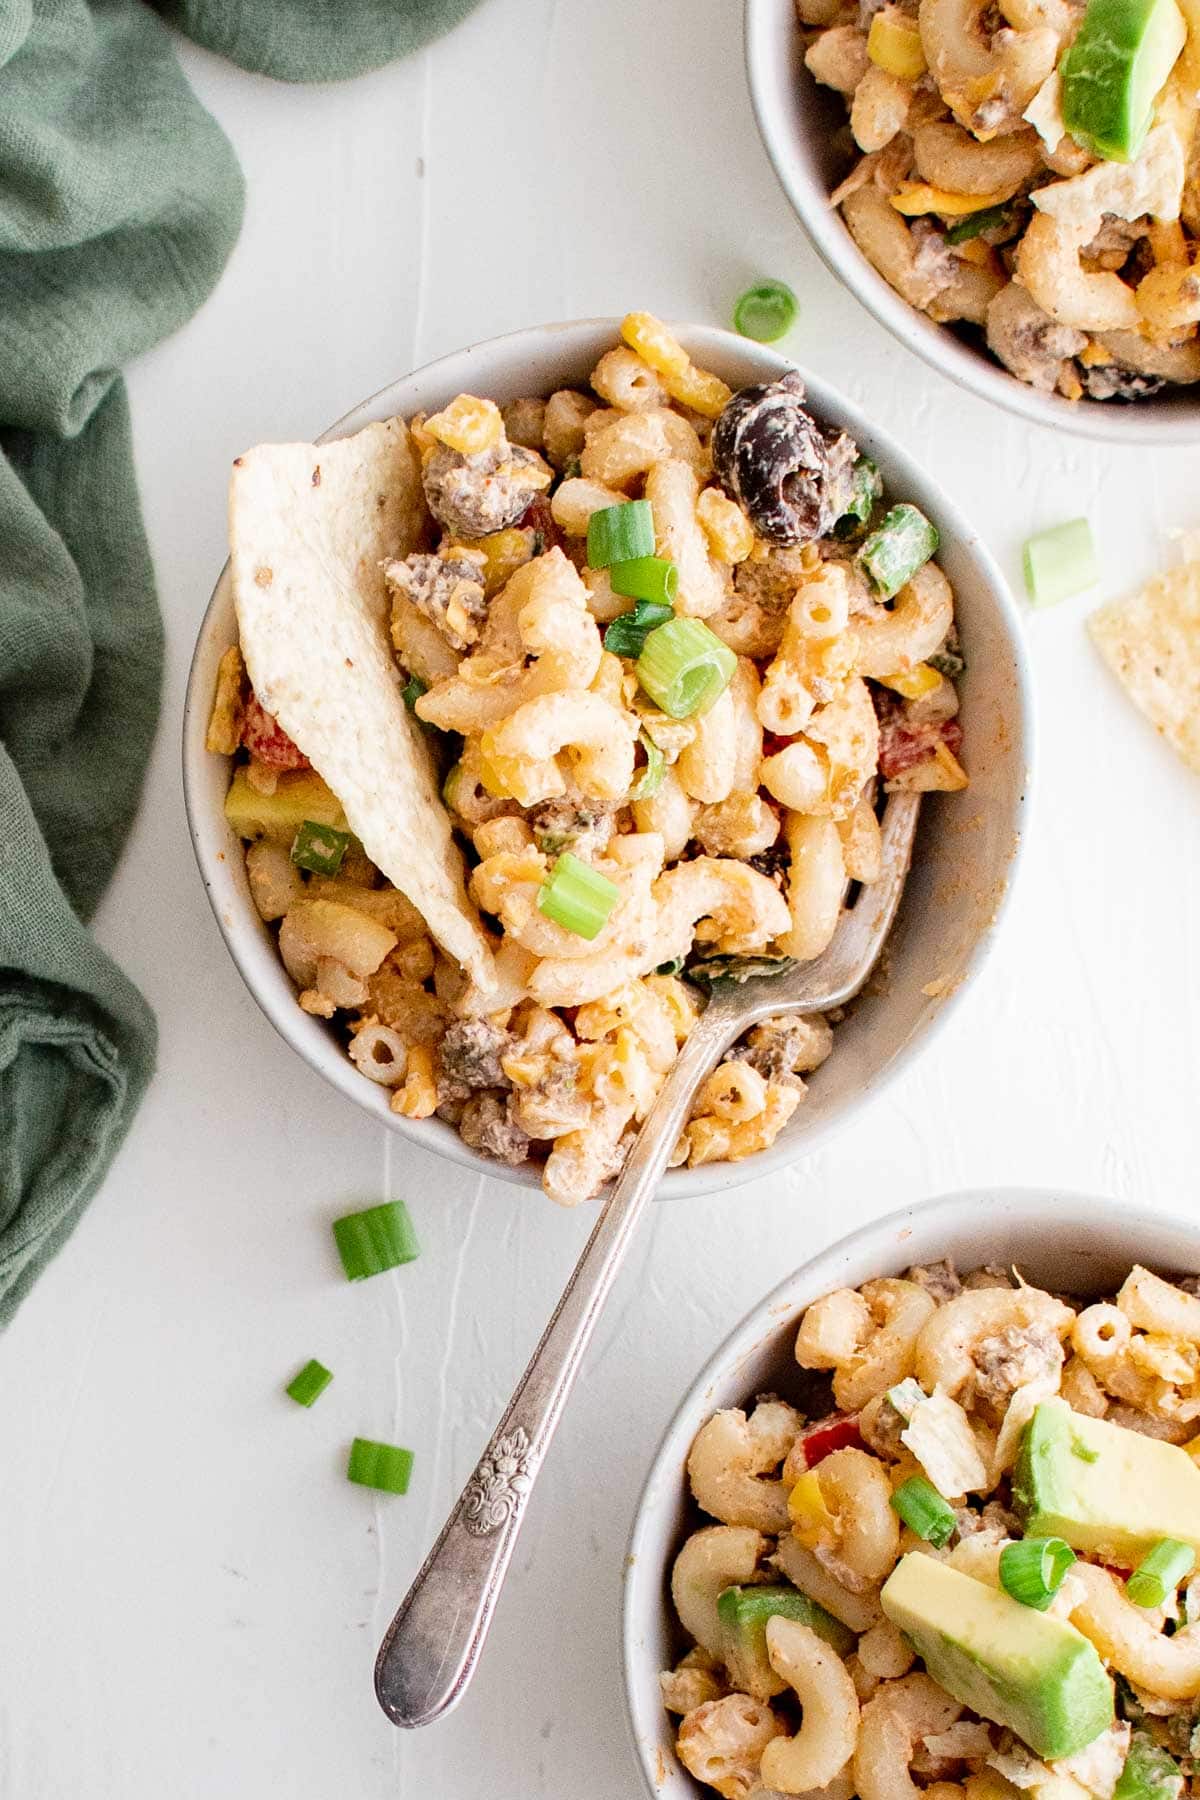 Taco pasta salad with corn and tortilla chips in a bowl.